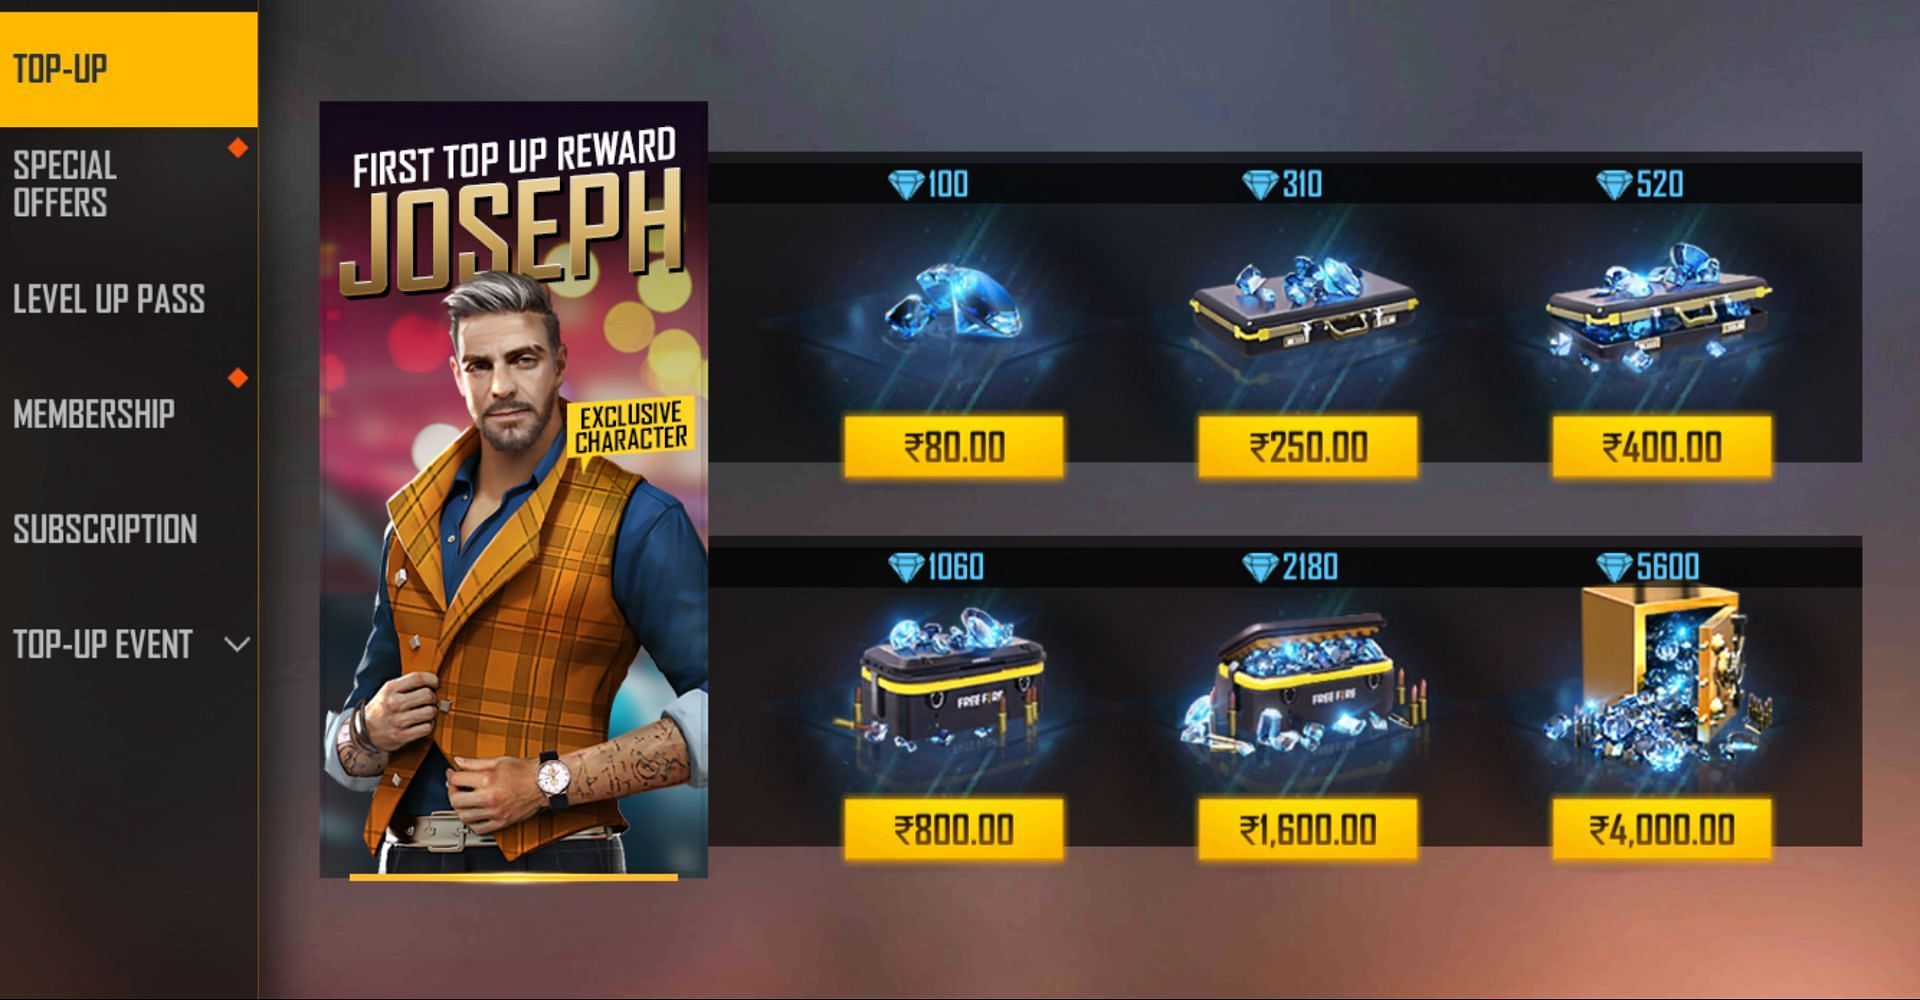 Players can purchase diamonds worth INR 400 for both rewards free of cost (Image via Garena)